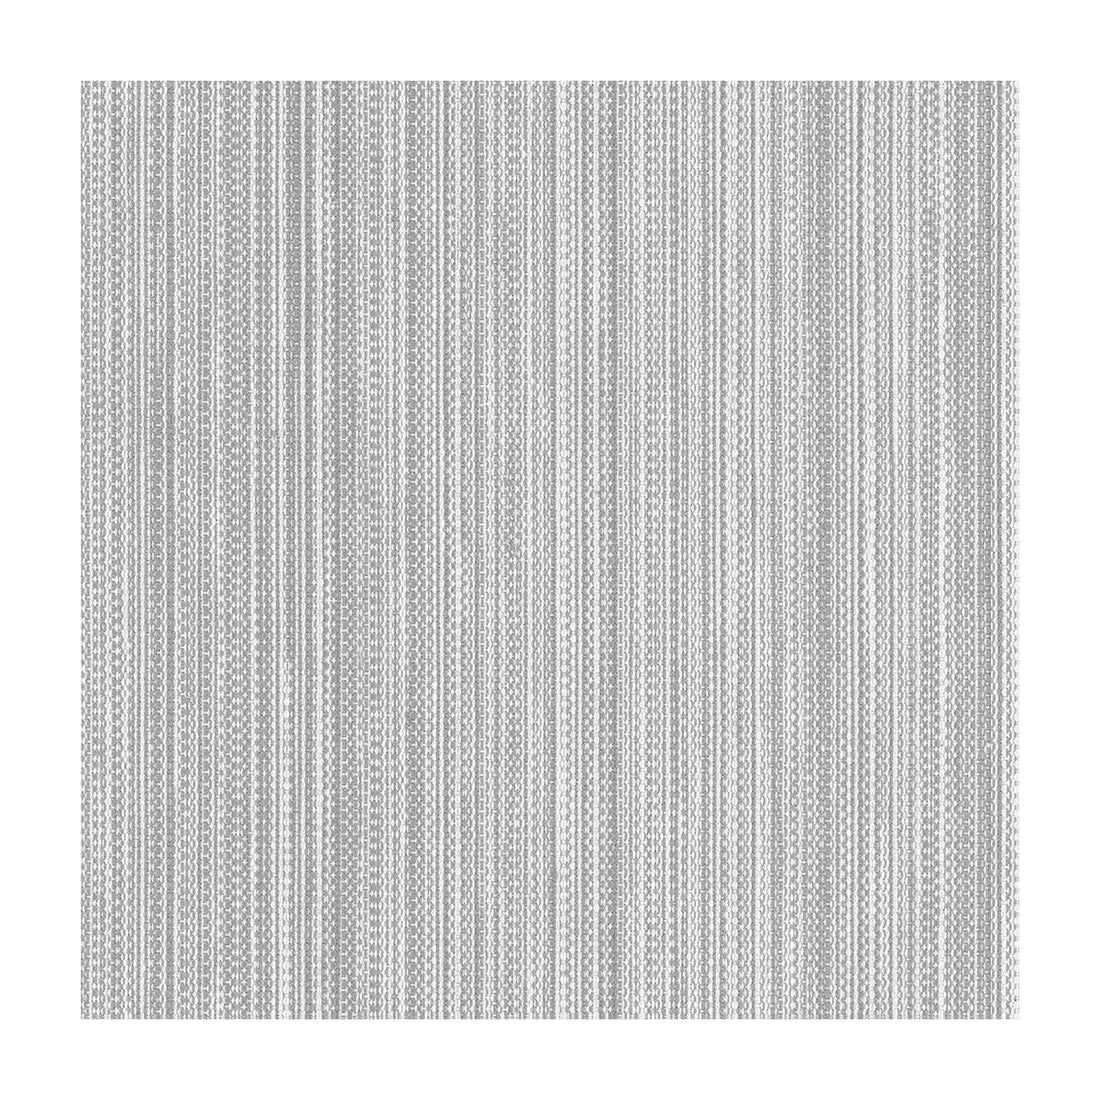 Lineweave fabric in pewter color - pattern 34270.11.0 - by Kravet Basics in the Sarah Richardson Harmony collection